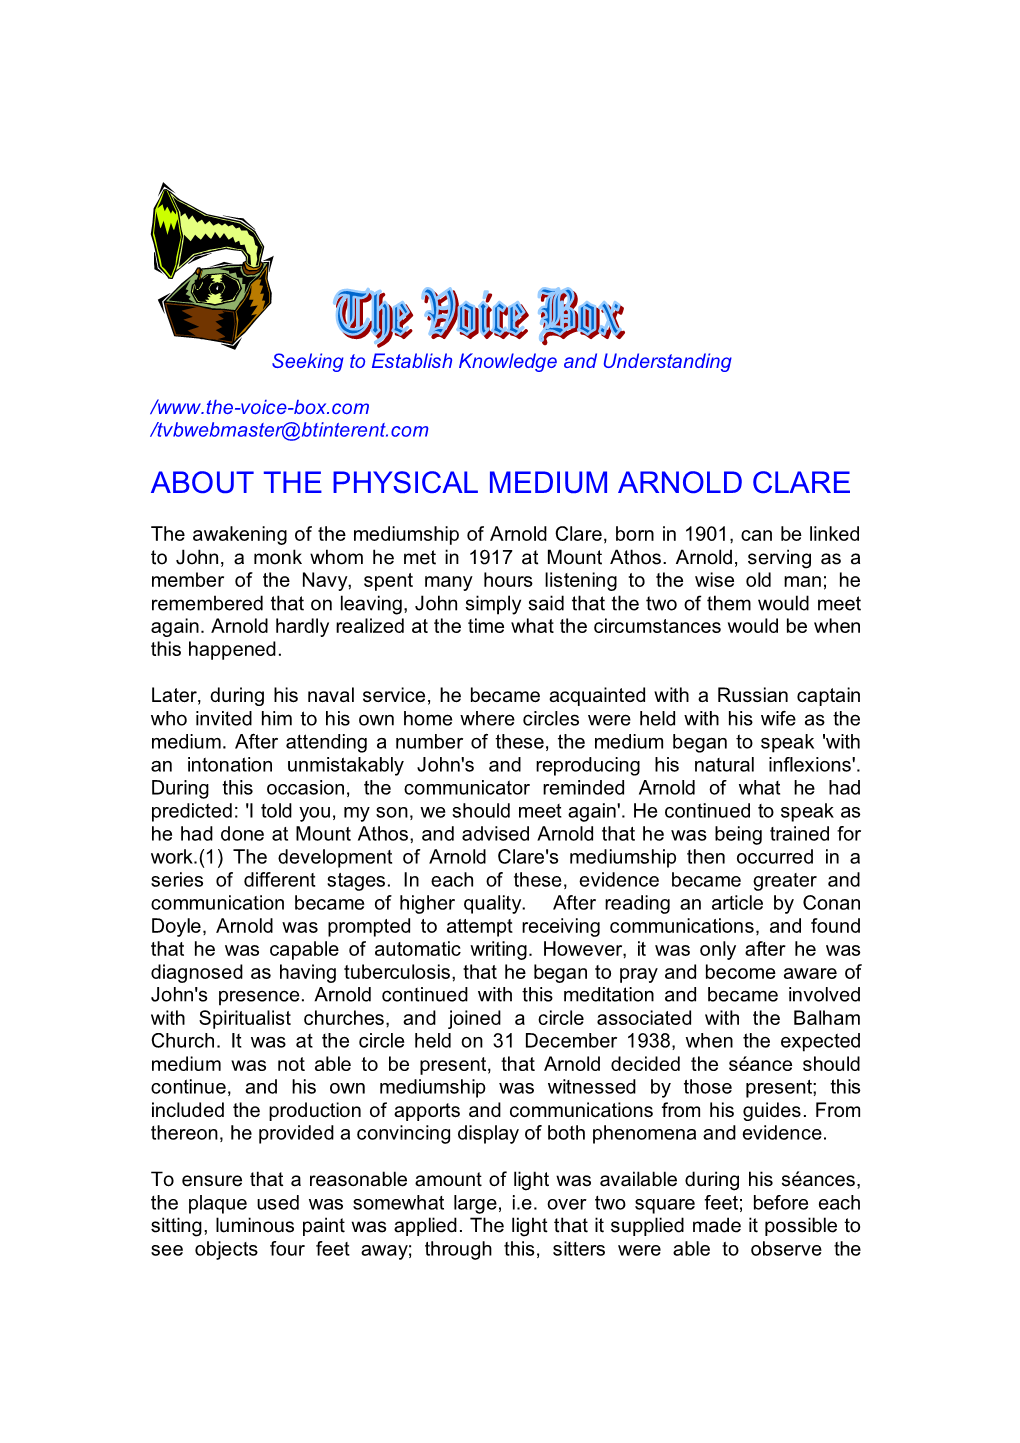 About the Physical Medium Arnold Clare